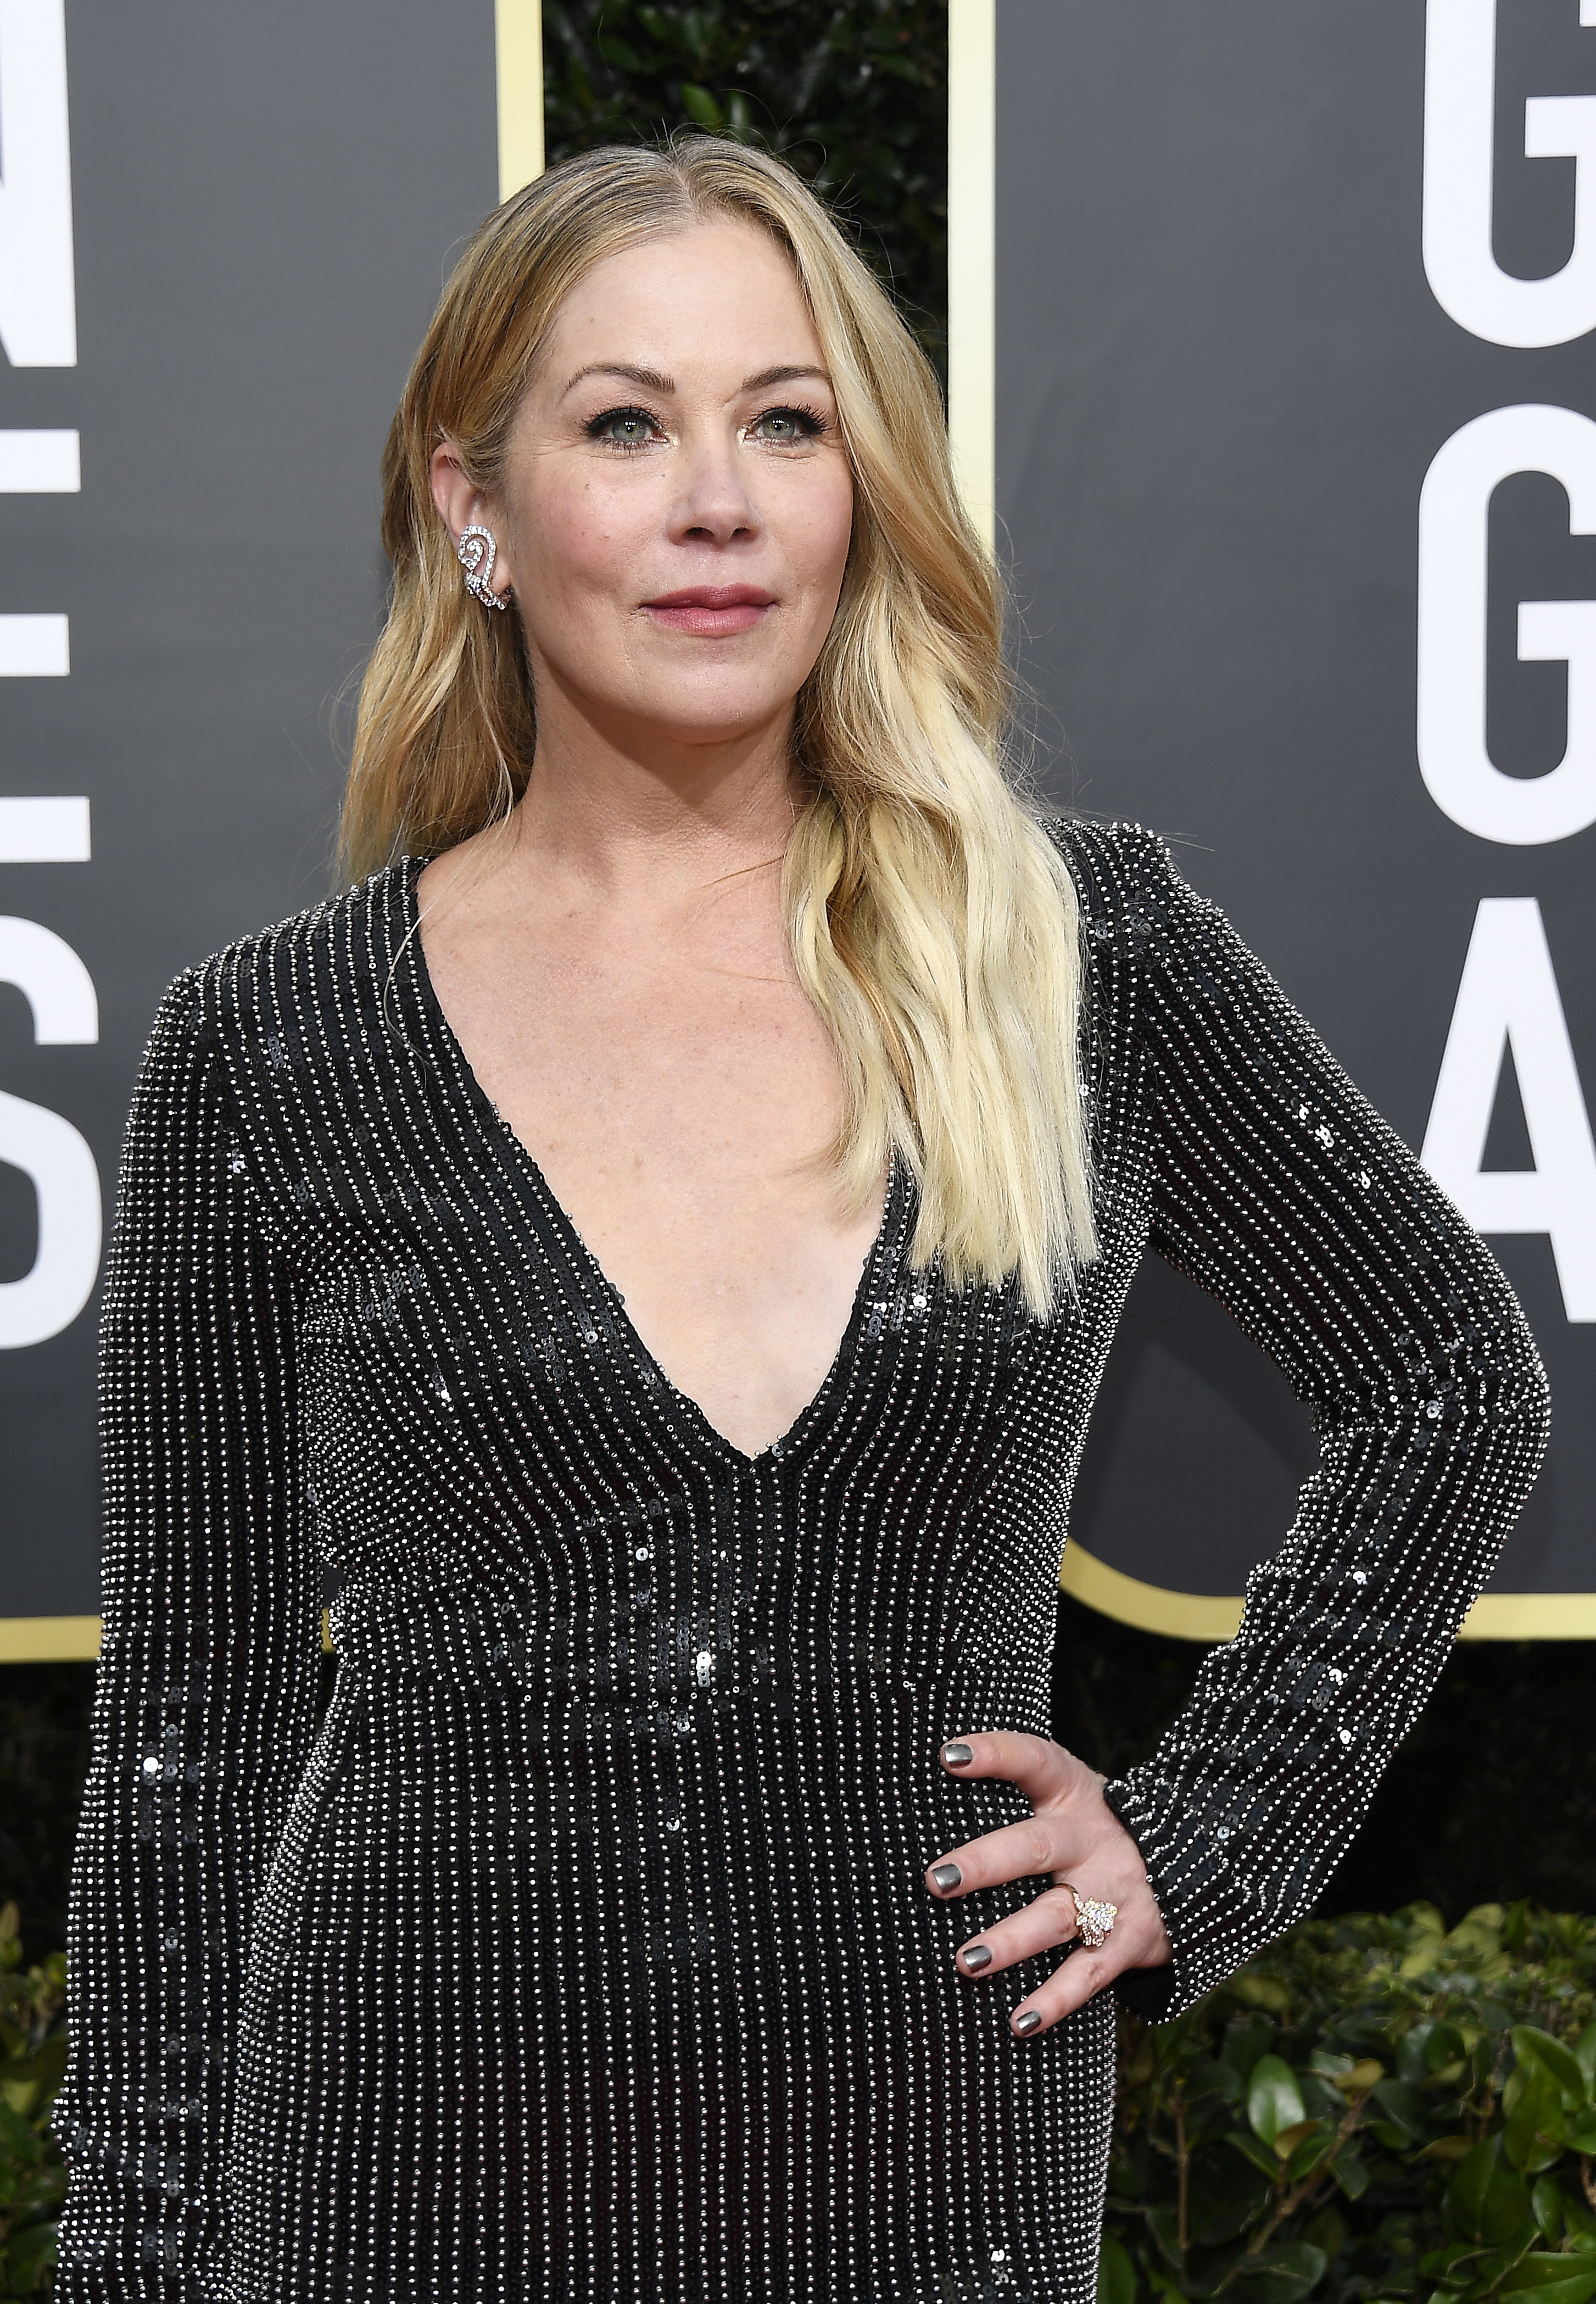 Christina Applegate arrives at the 77th Annual Golden Globe Awards held at the Beverly Hilton Hotel on January 5, 2020. | Source: Getty Images